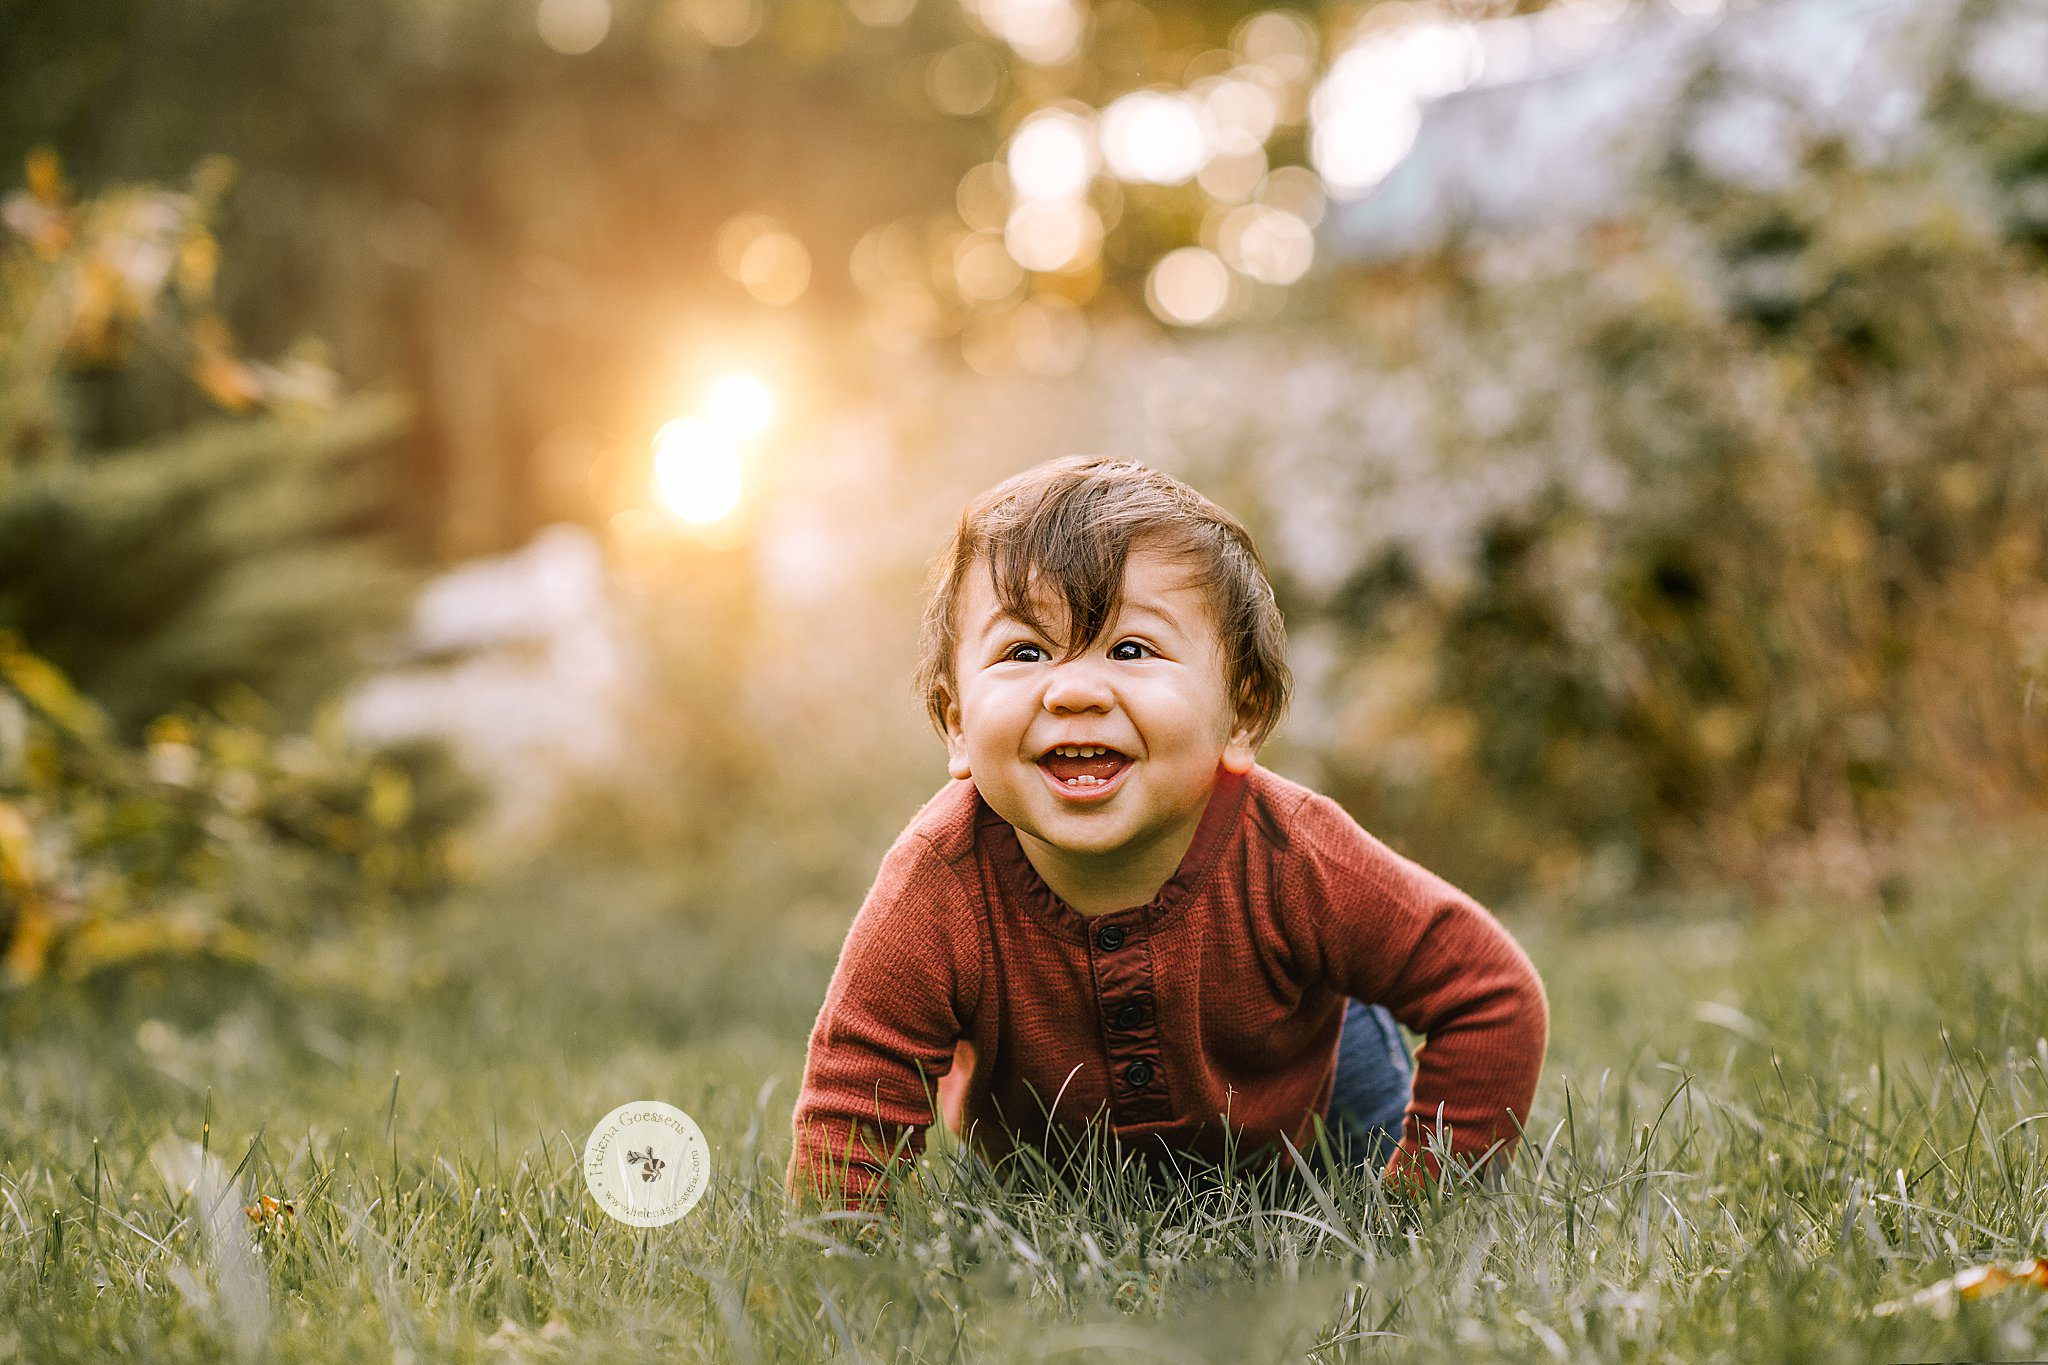 Helena Goessens Photography captures toddler playing in grass